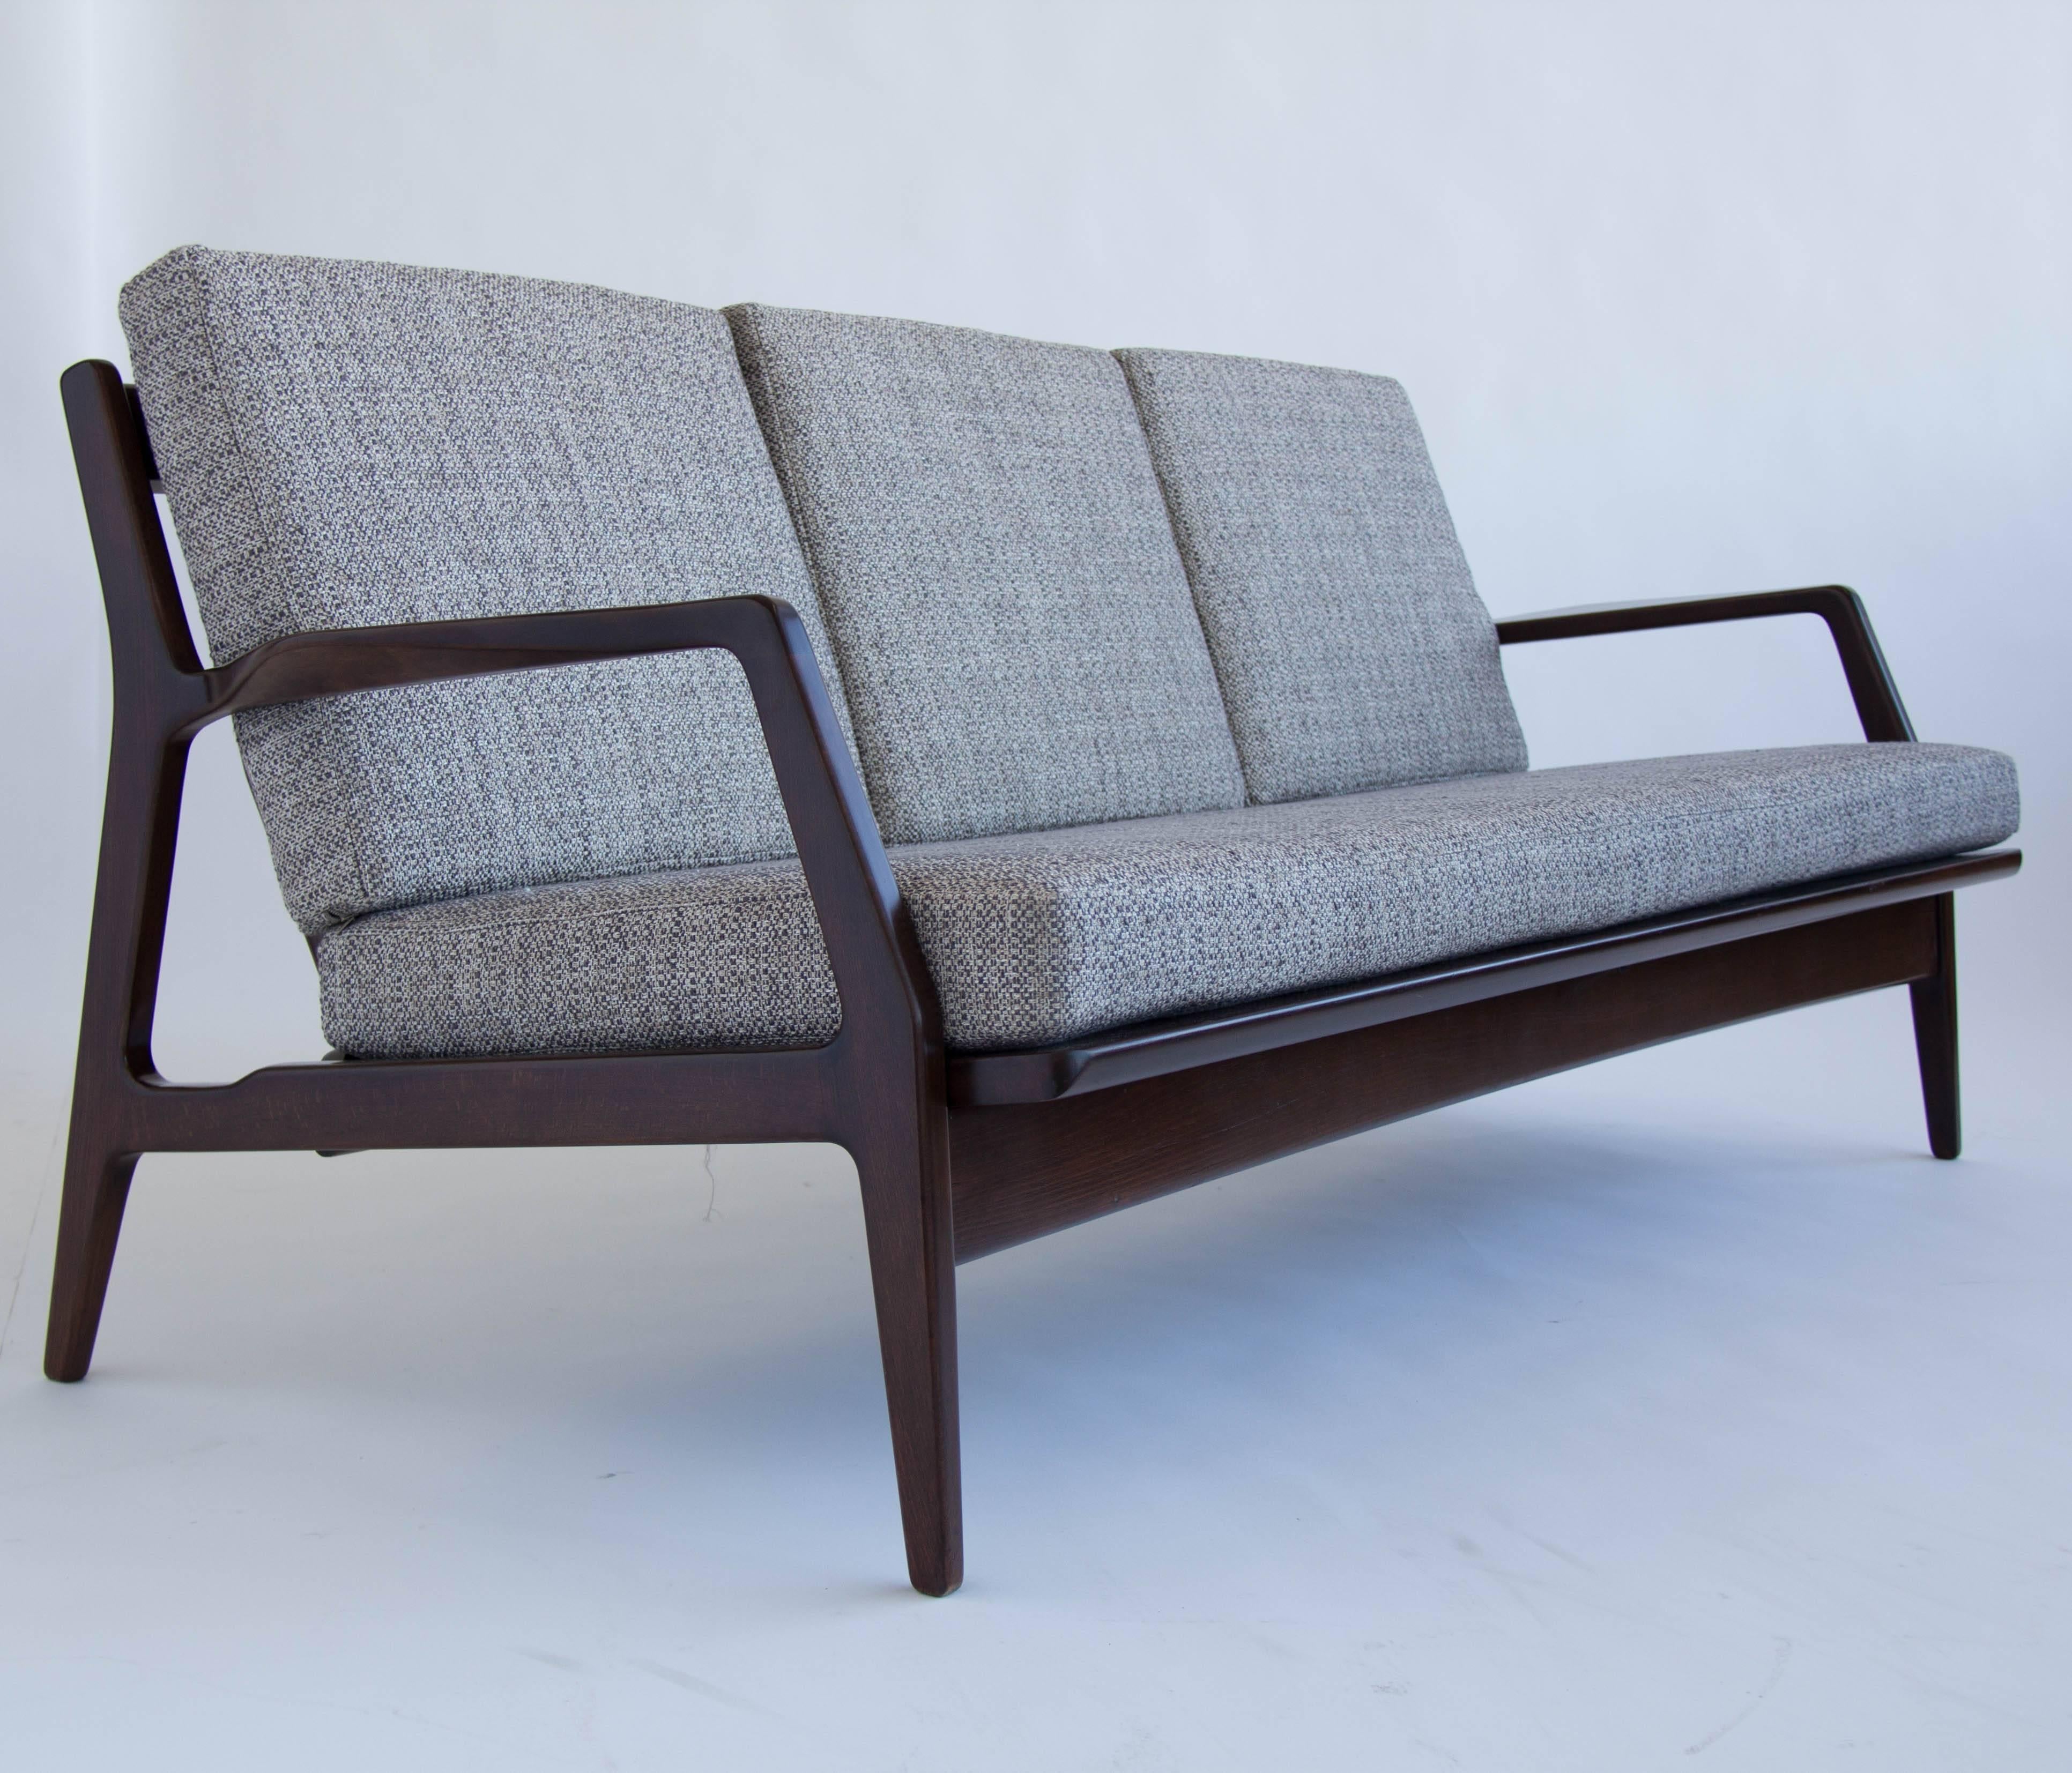 Danish modern sofa by Ib Kofod-Larsen for Selig. Sculptural solid frame with a walnut finish. The frame has been fully restored. The upholstery, foam and straps that holds up the seat have been replaced.